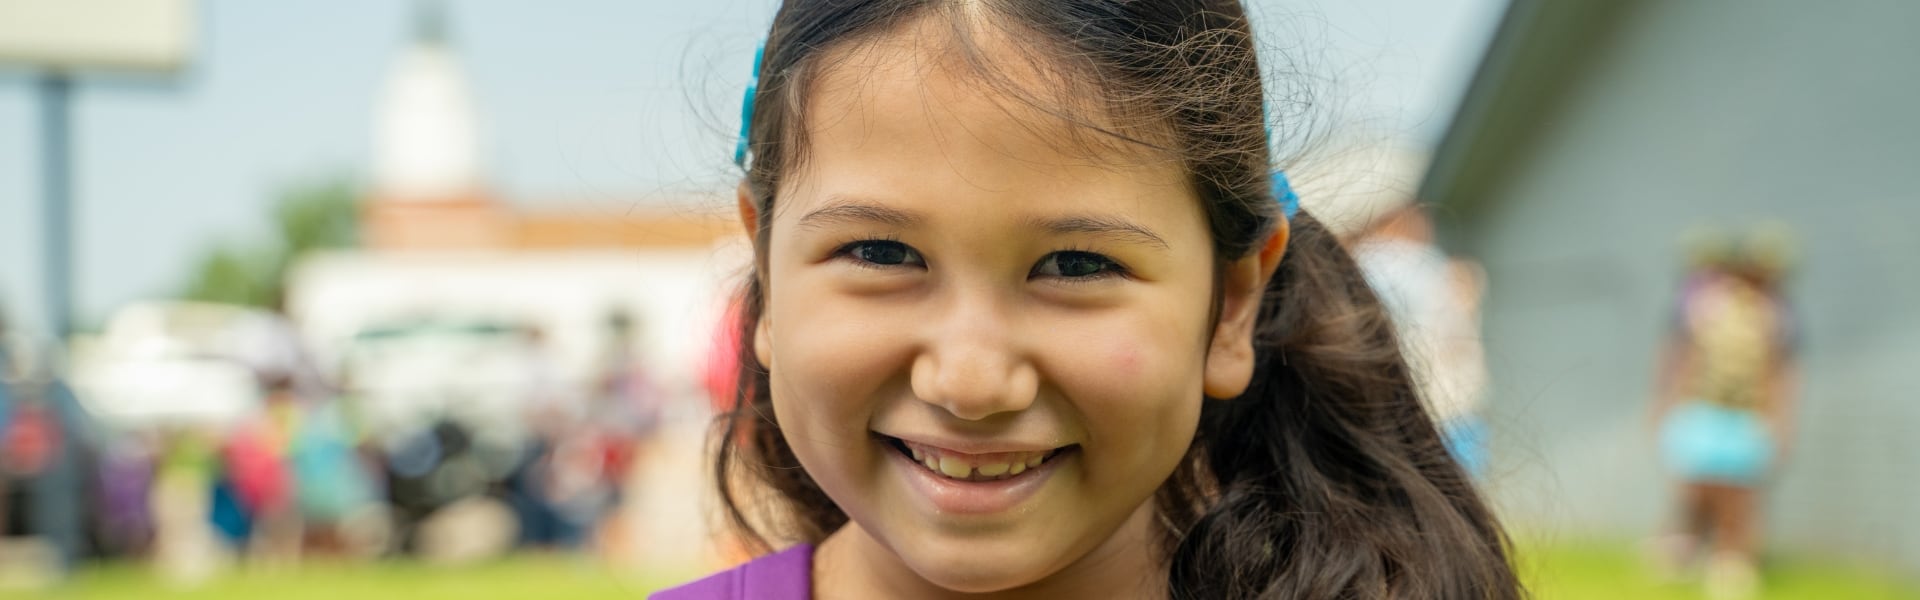 A child smiling while outdoors at an event